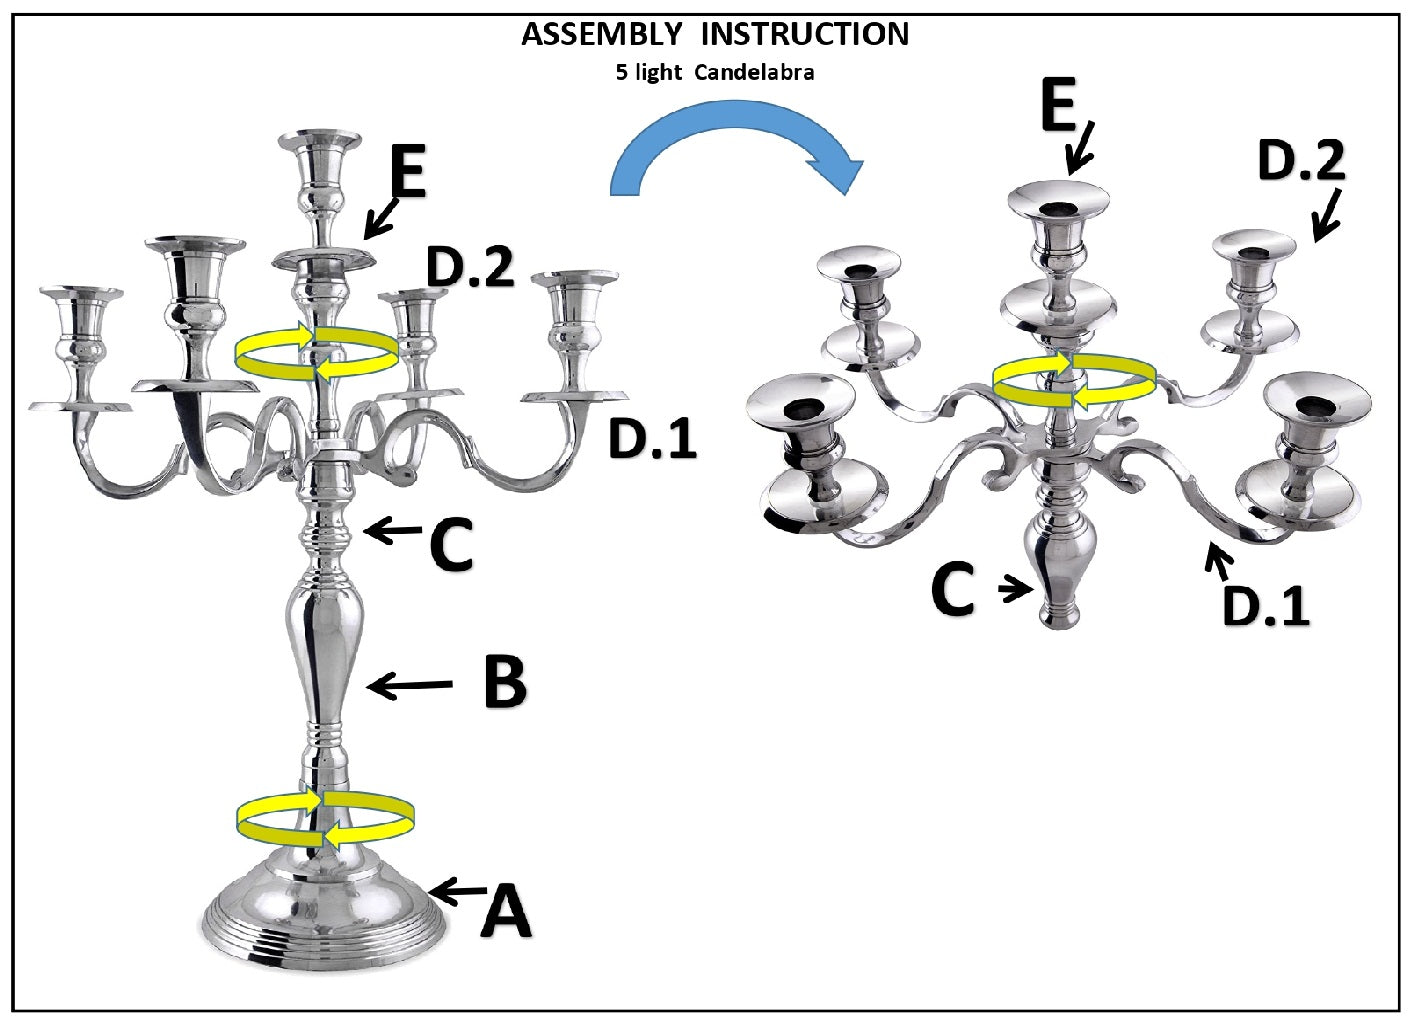 40 INCH OR 3 Foot Tall Floor 5 arm Candlestick Candelabra in Silver